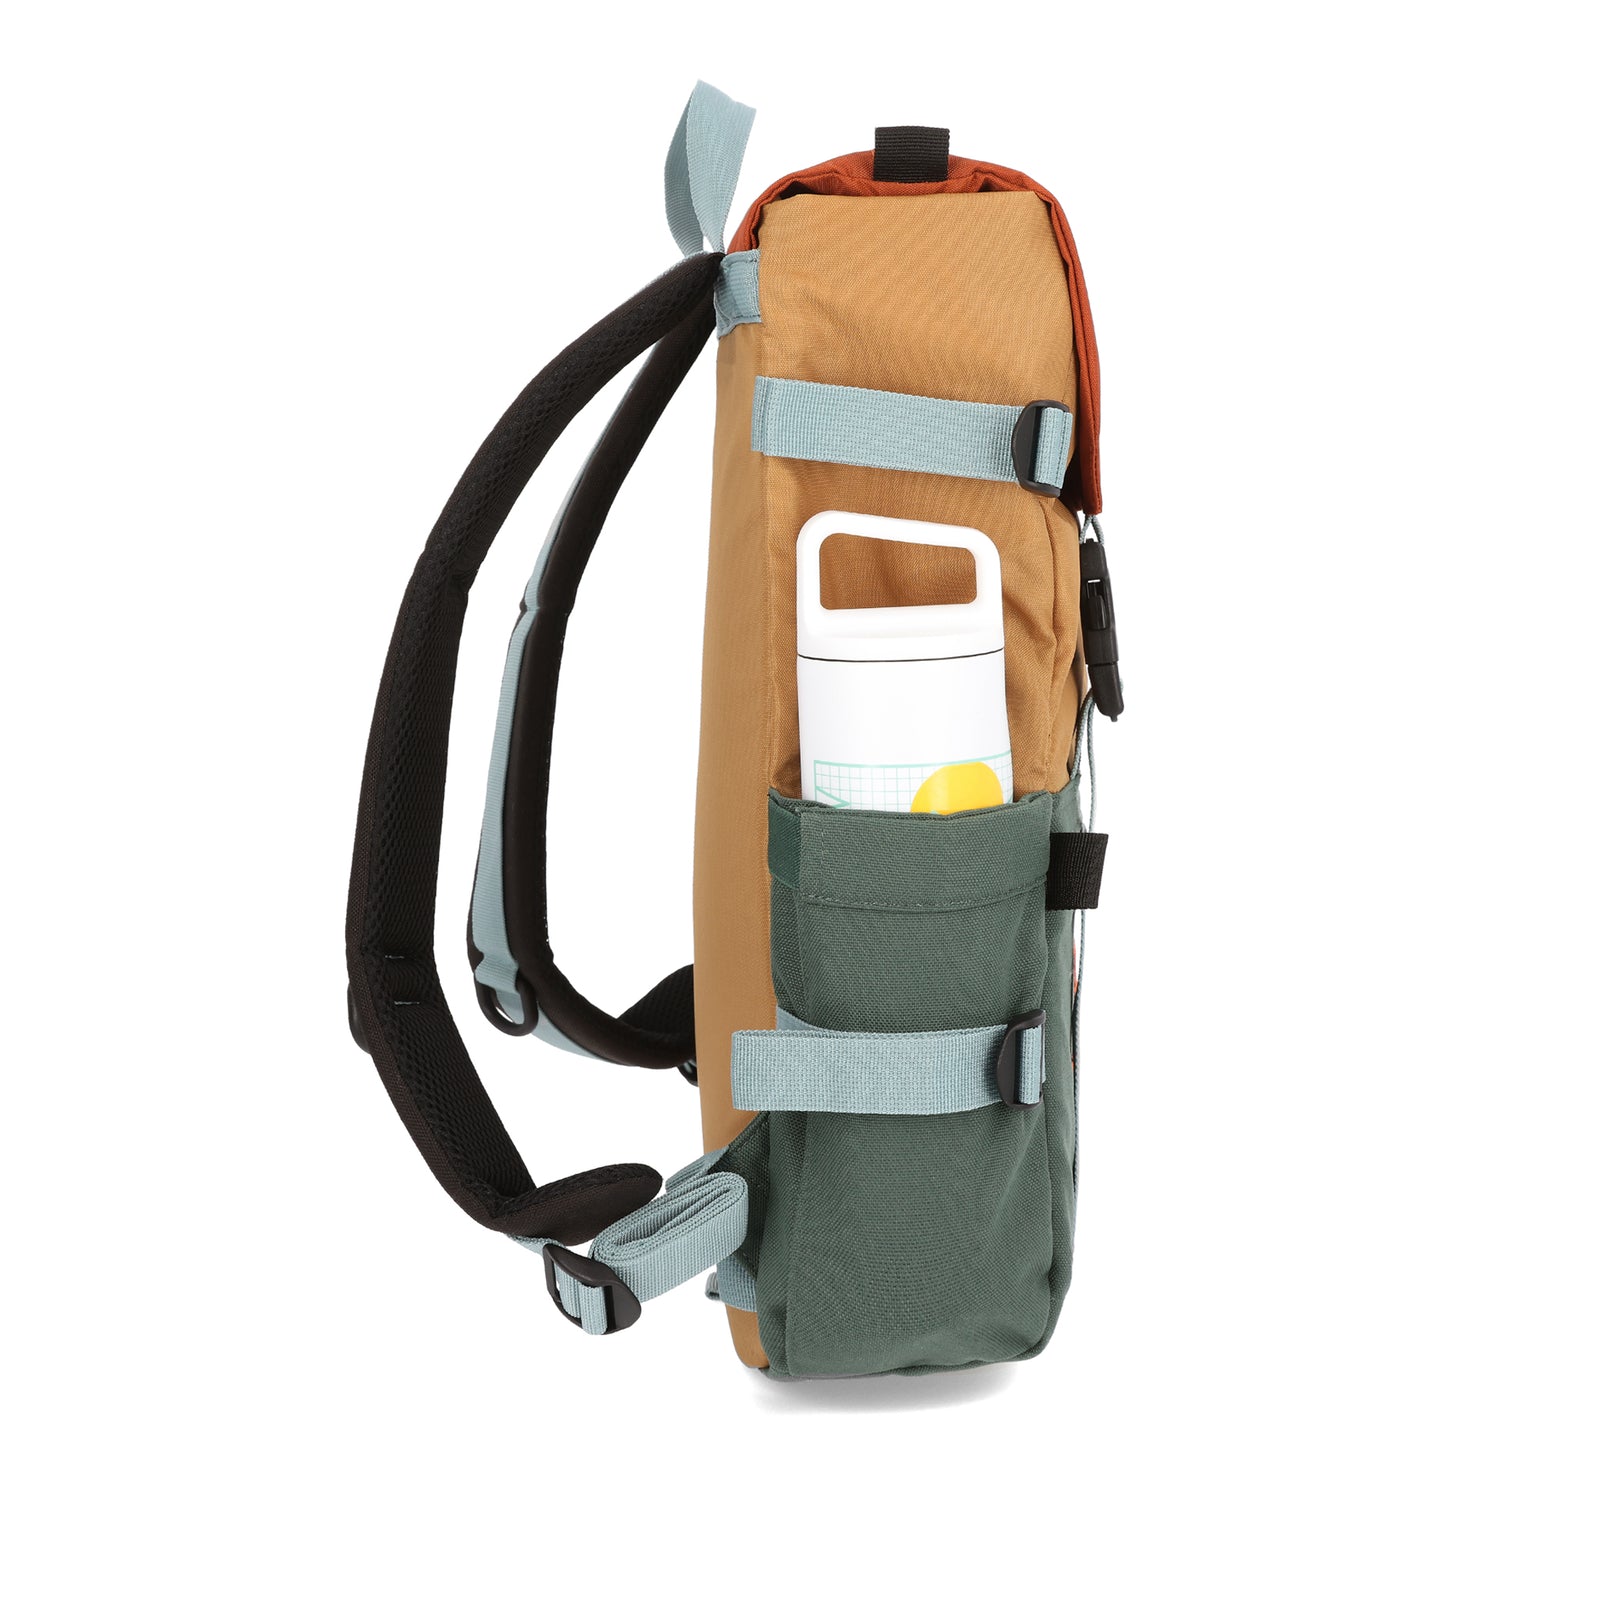 general shot Topo Designs Rover Pack Classic laptop backpack in "Forest / Khaki".